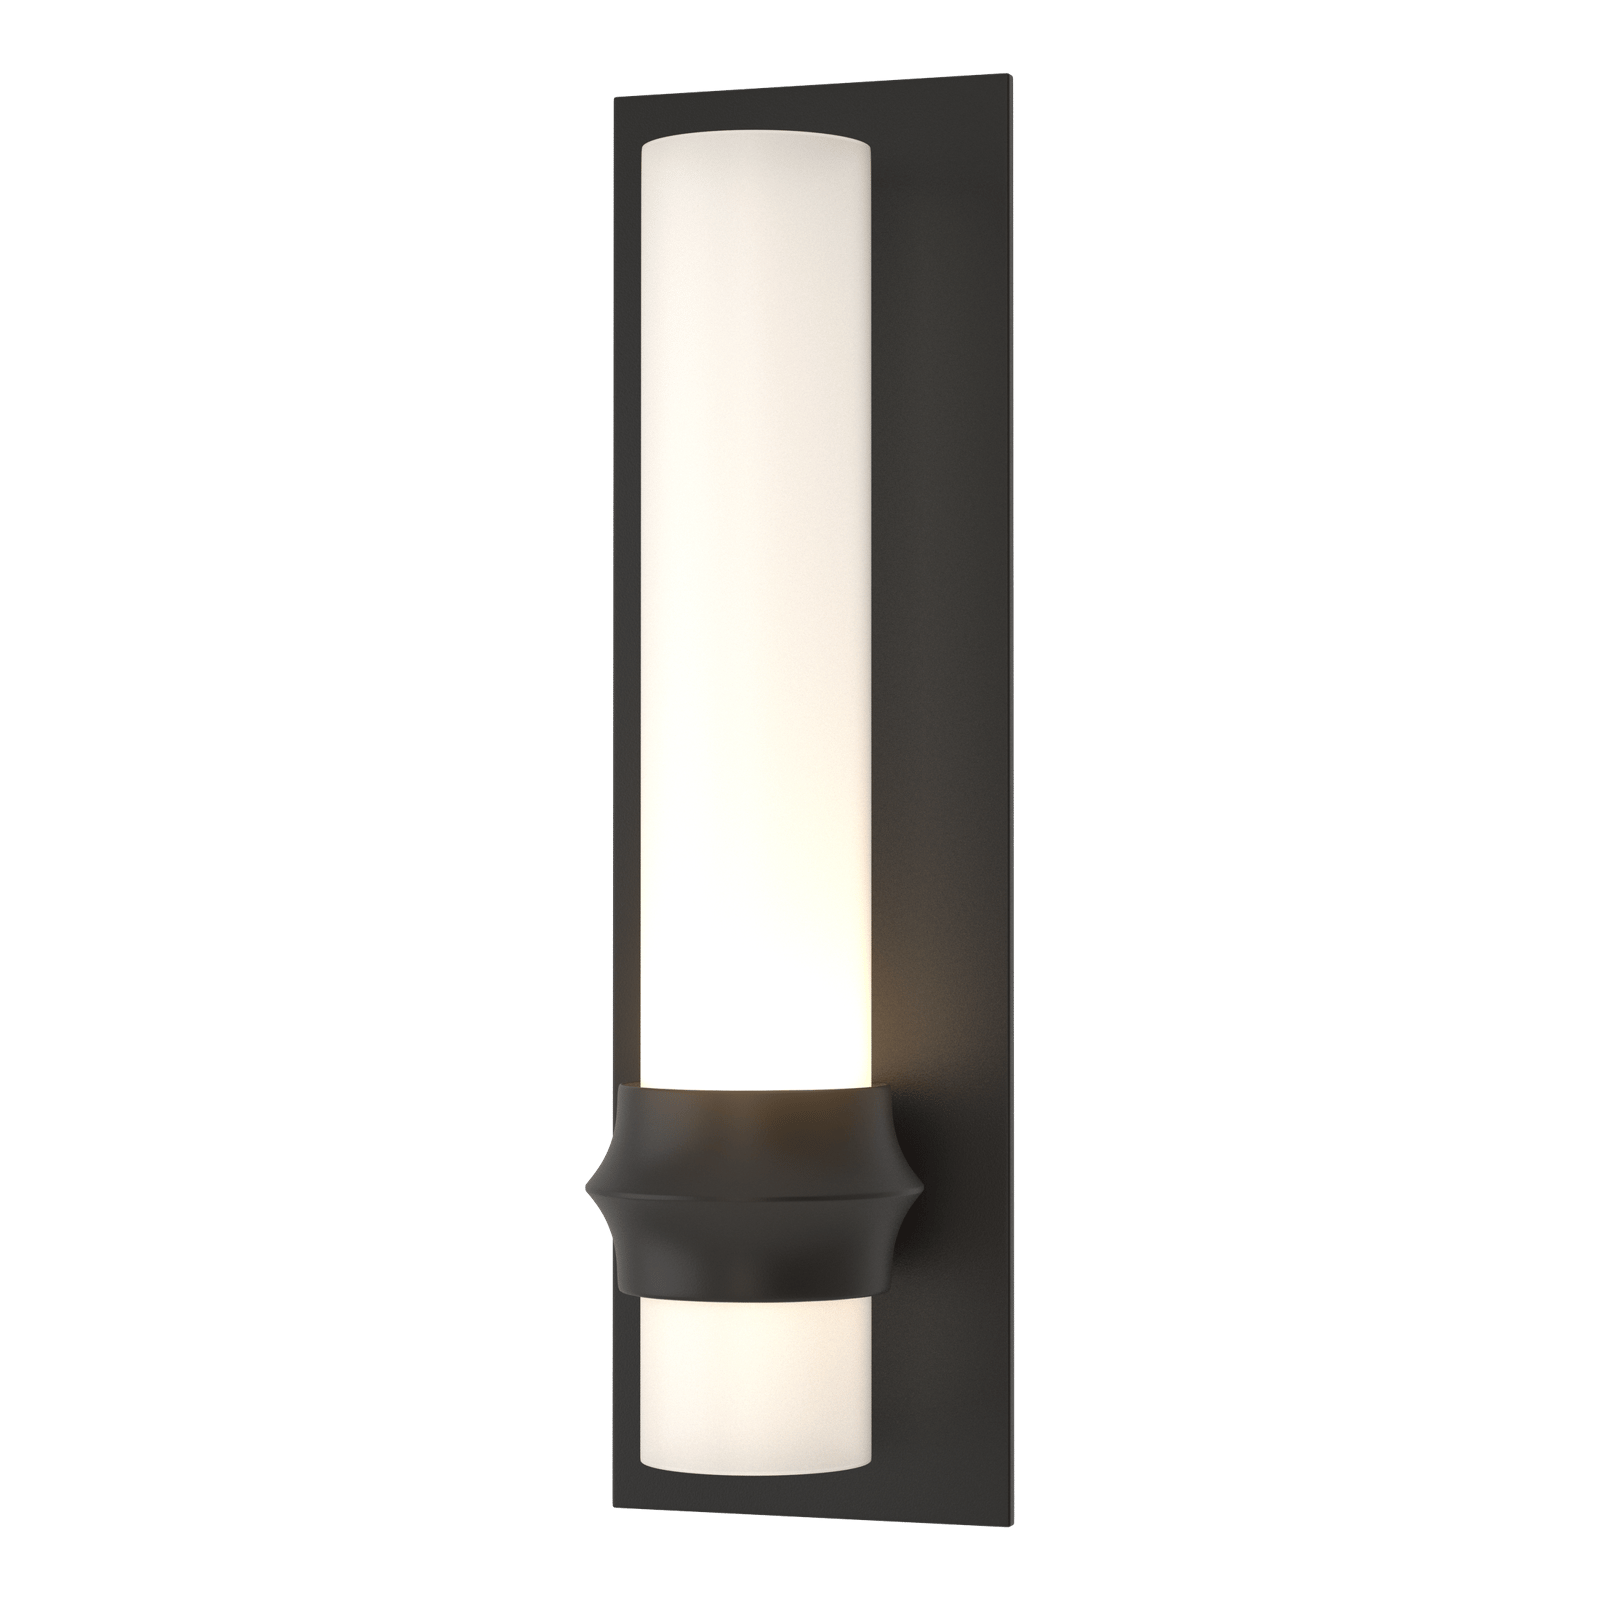 Hubbardton Forge Rook Small Outdoor Sconce Outdoor l Wall Hubbardton Forge Coastal Black  